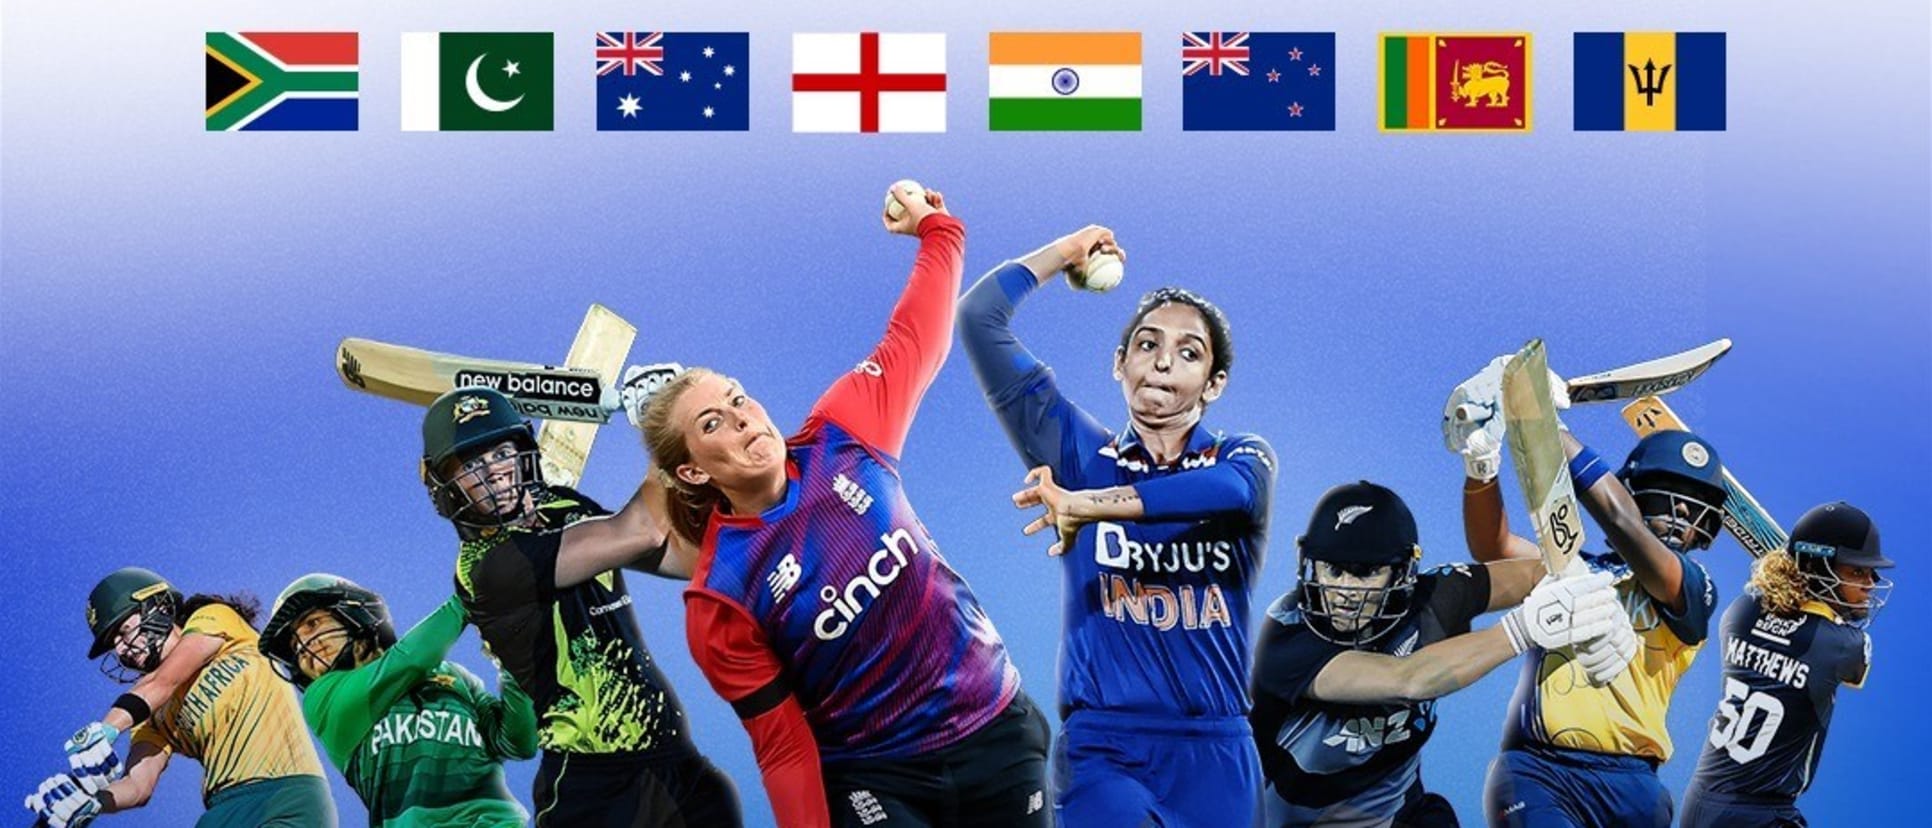 Cricket at the Commonwealth Games begins on 29 July.